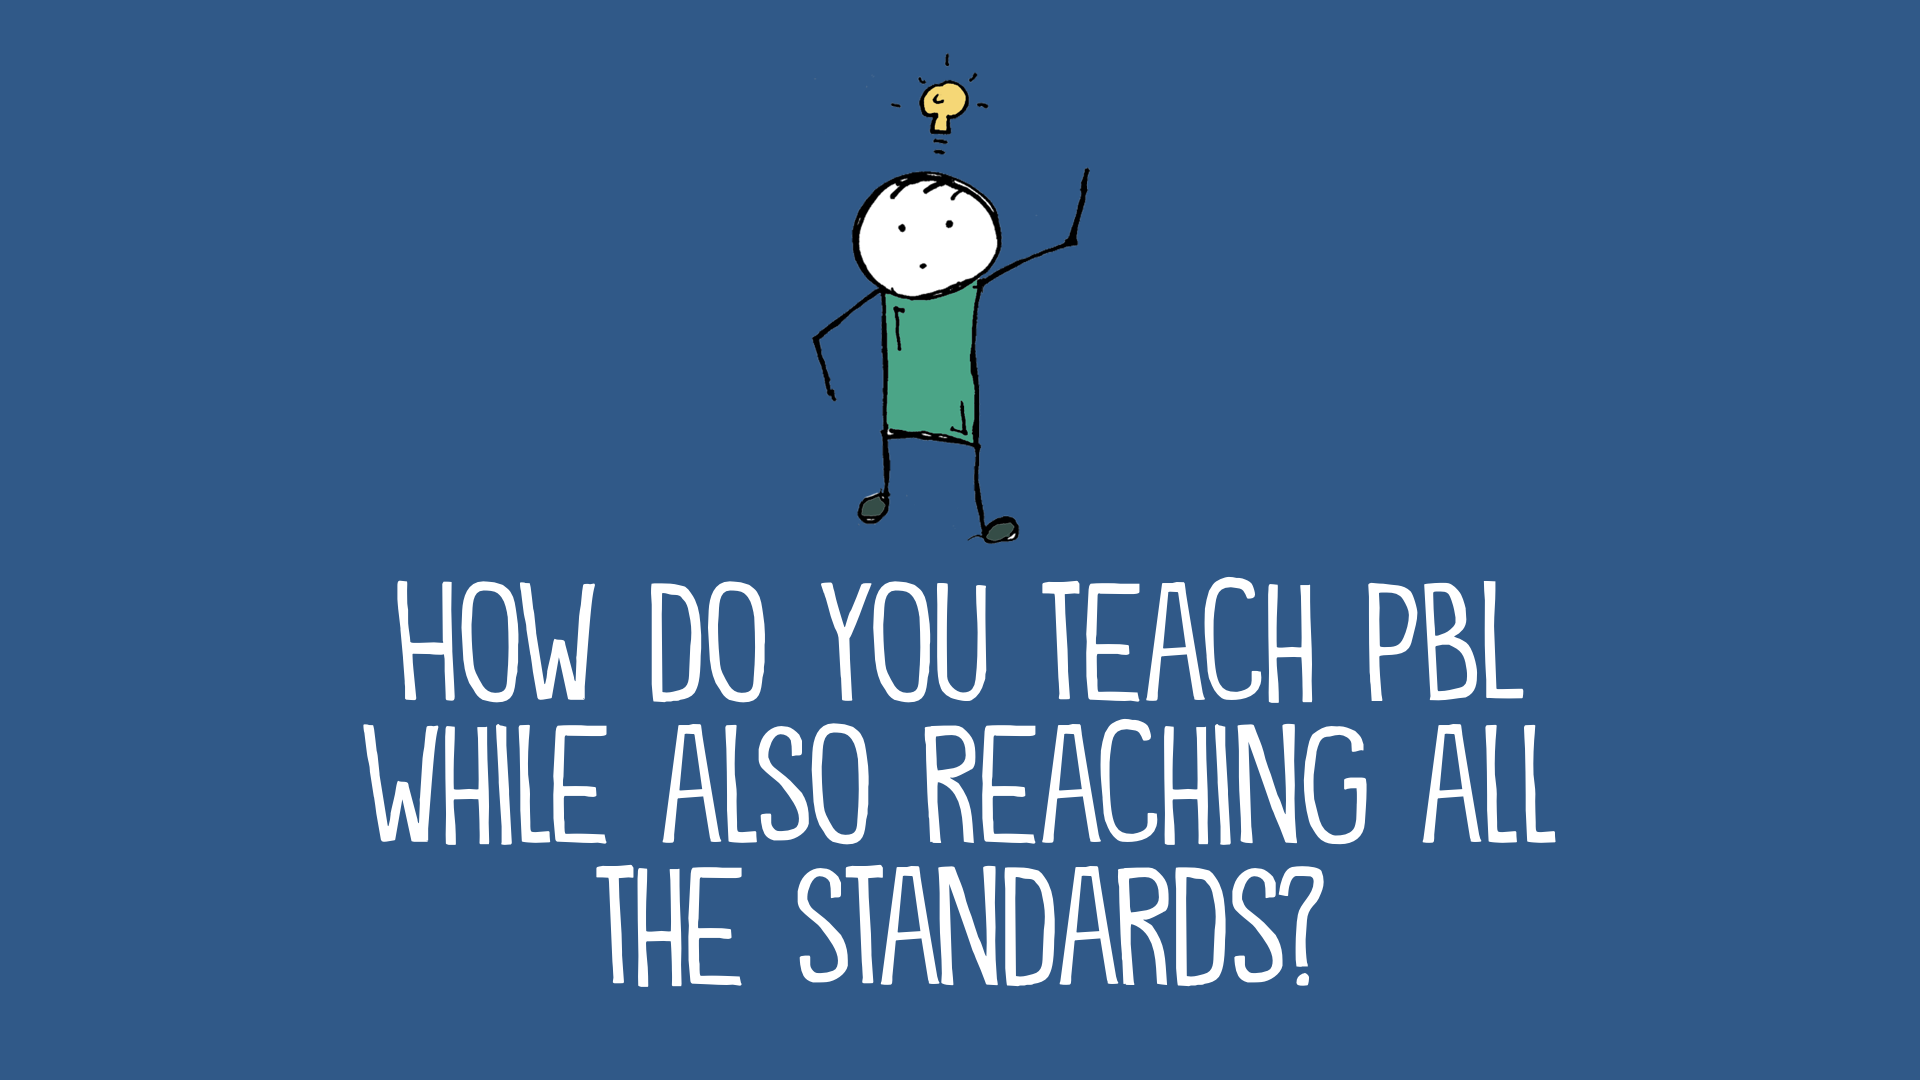 how-do-you-teach-to-the-standards-when-doing-project-based-learning